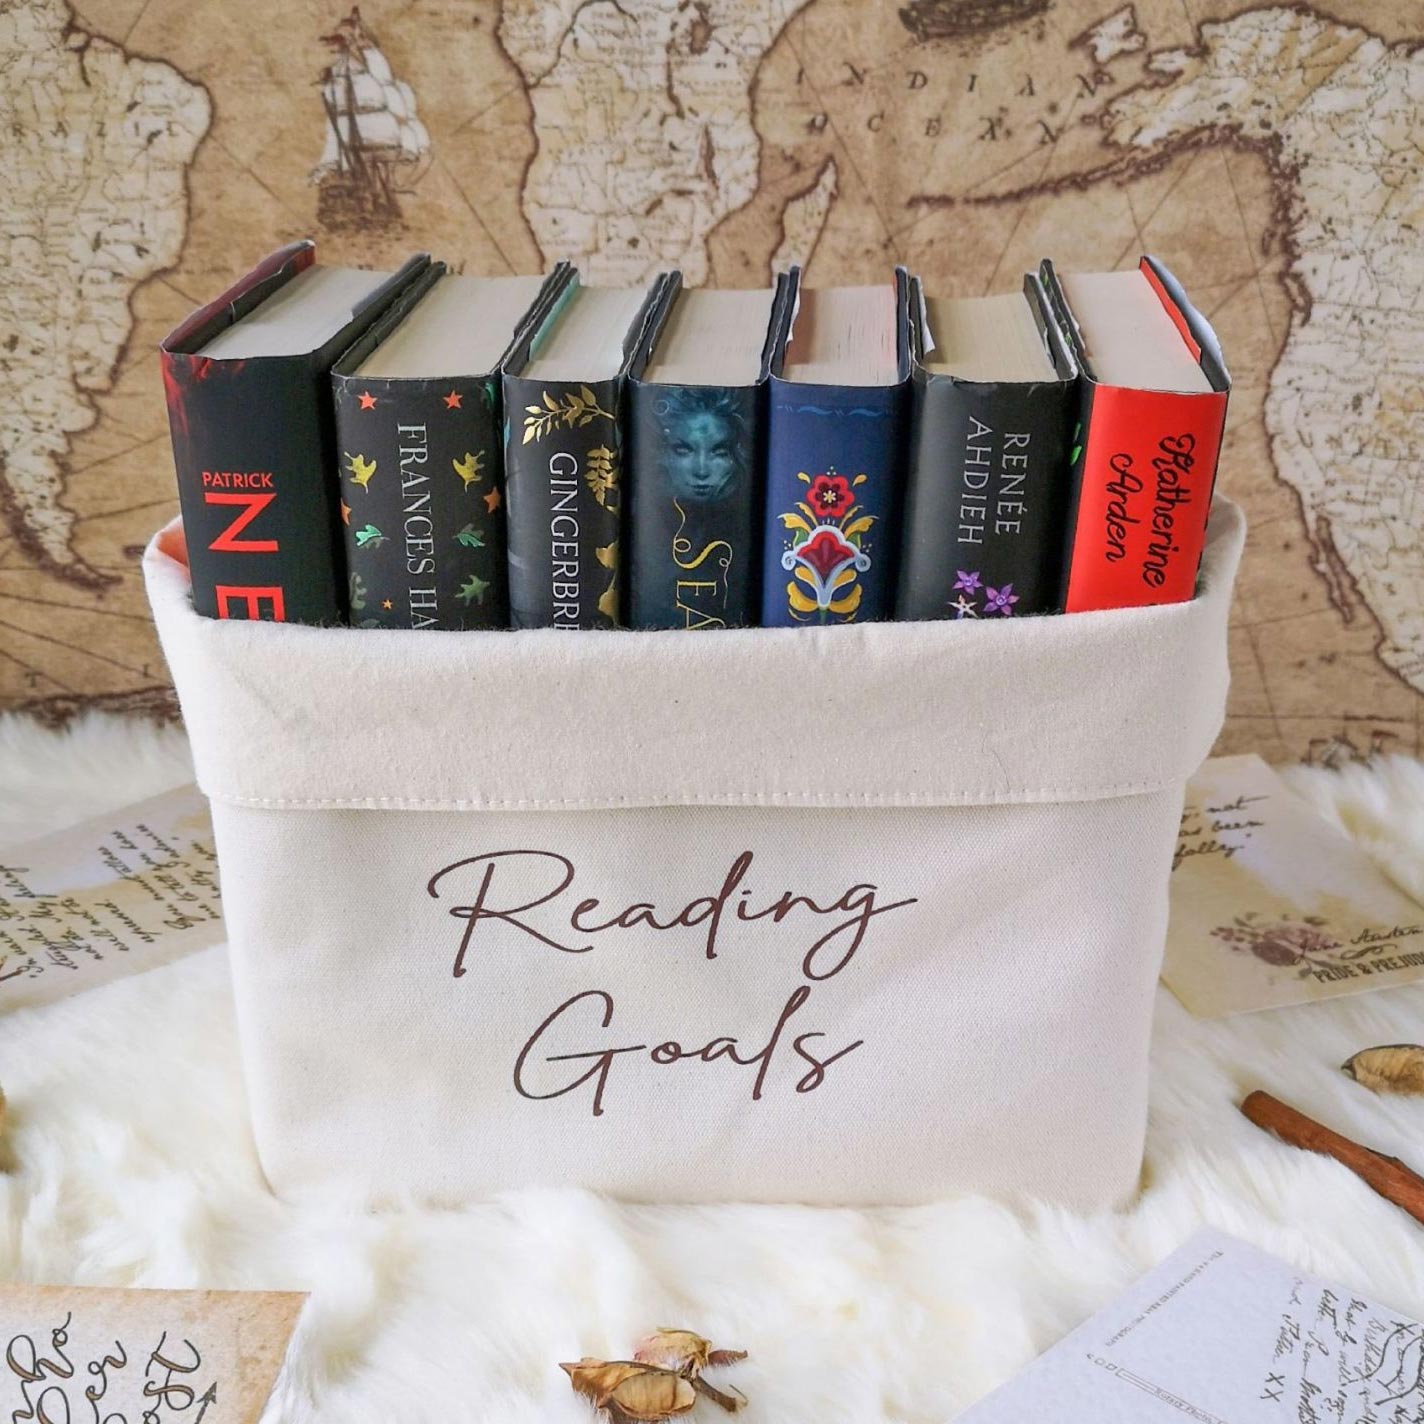 New in - New gifts for book lovers, writers and you!